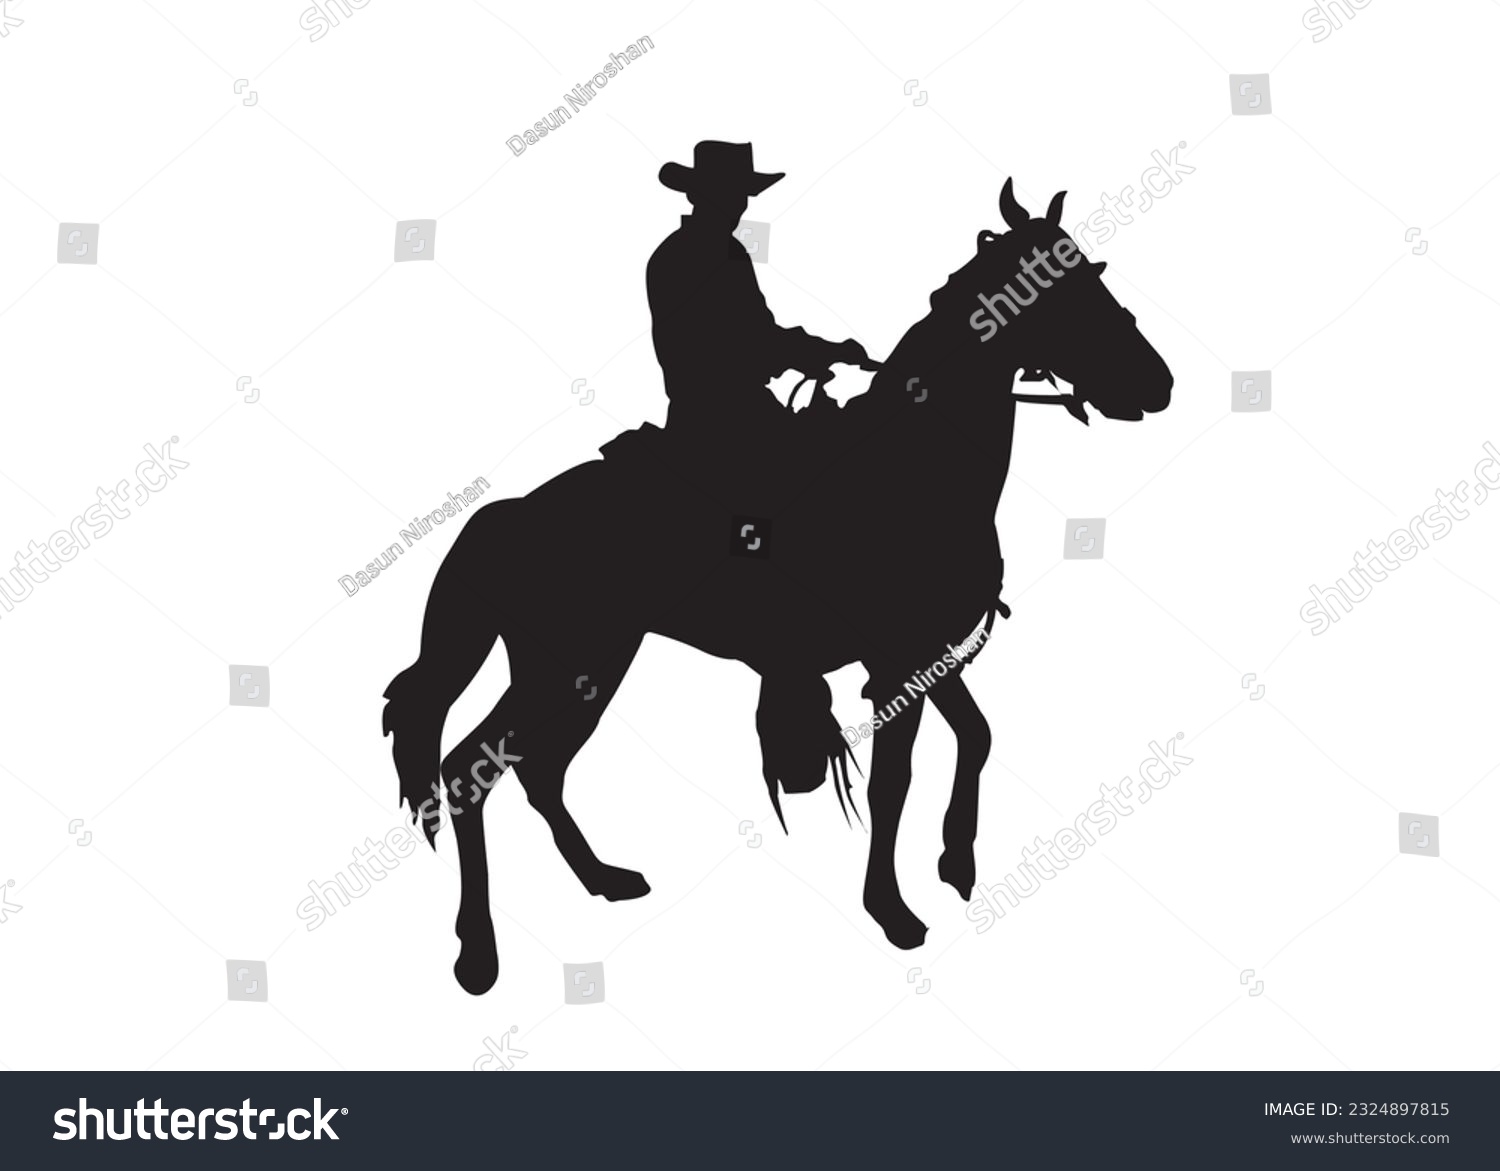 SVG of Cowboy riding a horse. Vector illustration for printing and cutting viny svg